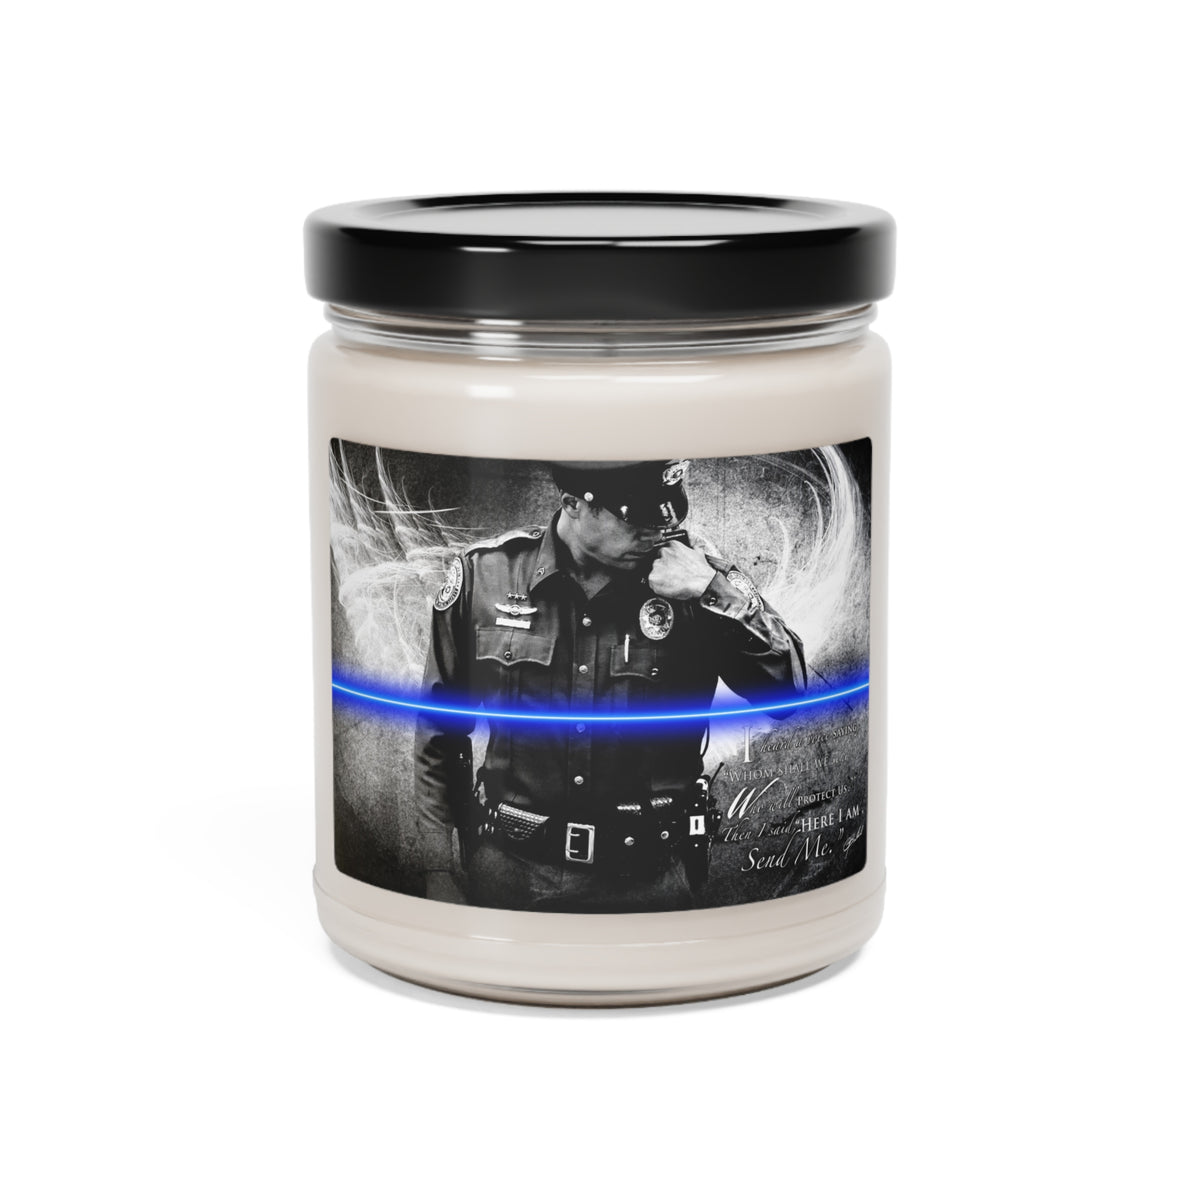 Send Me Police 9oz Scented Soy Candle